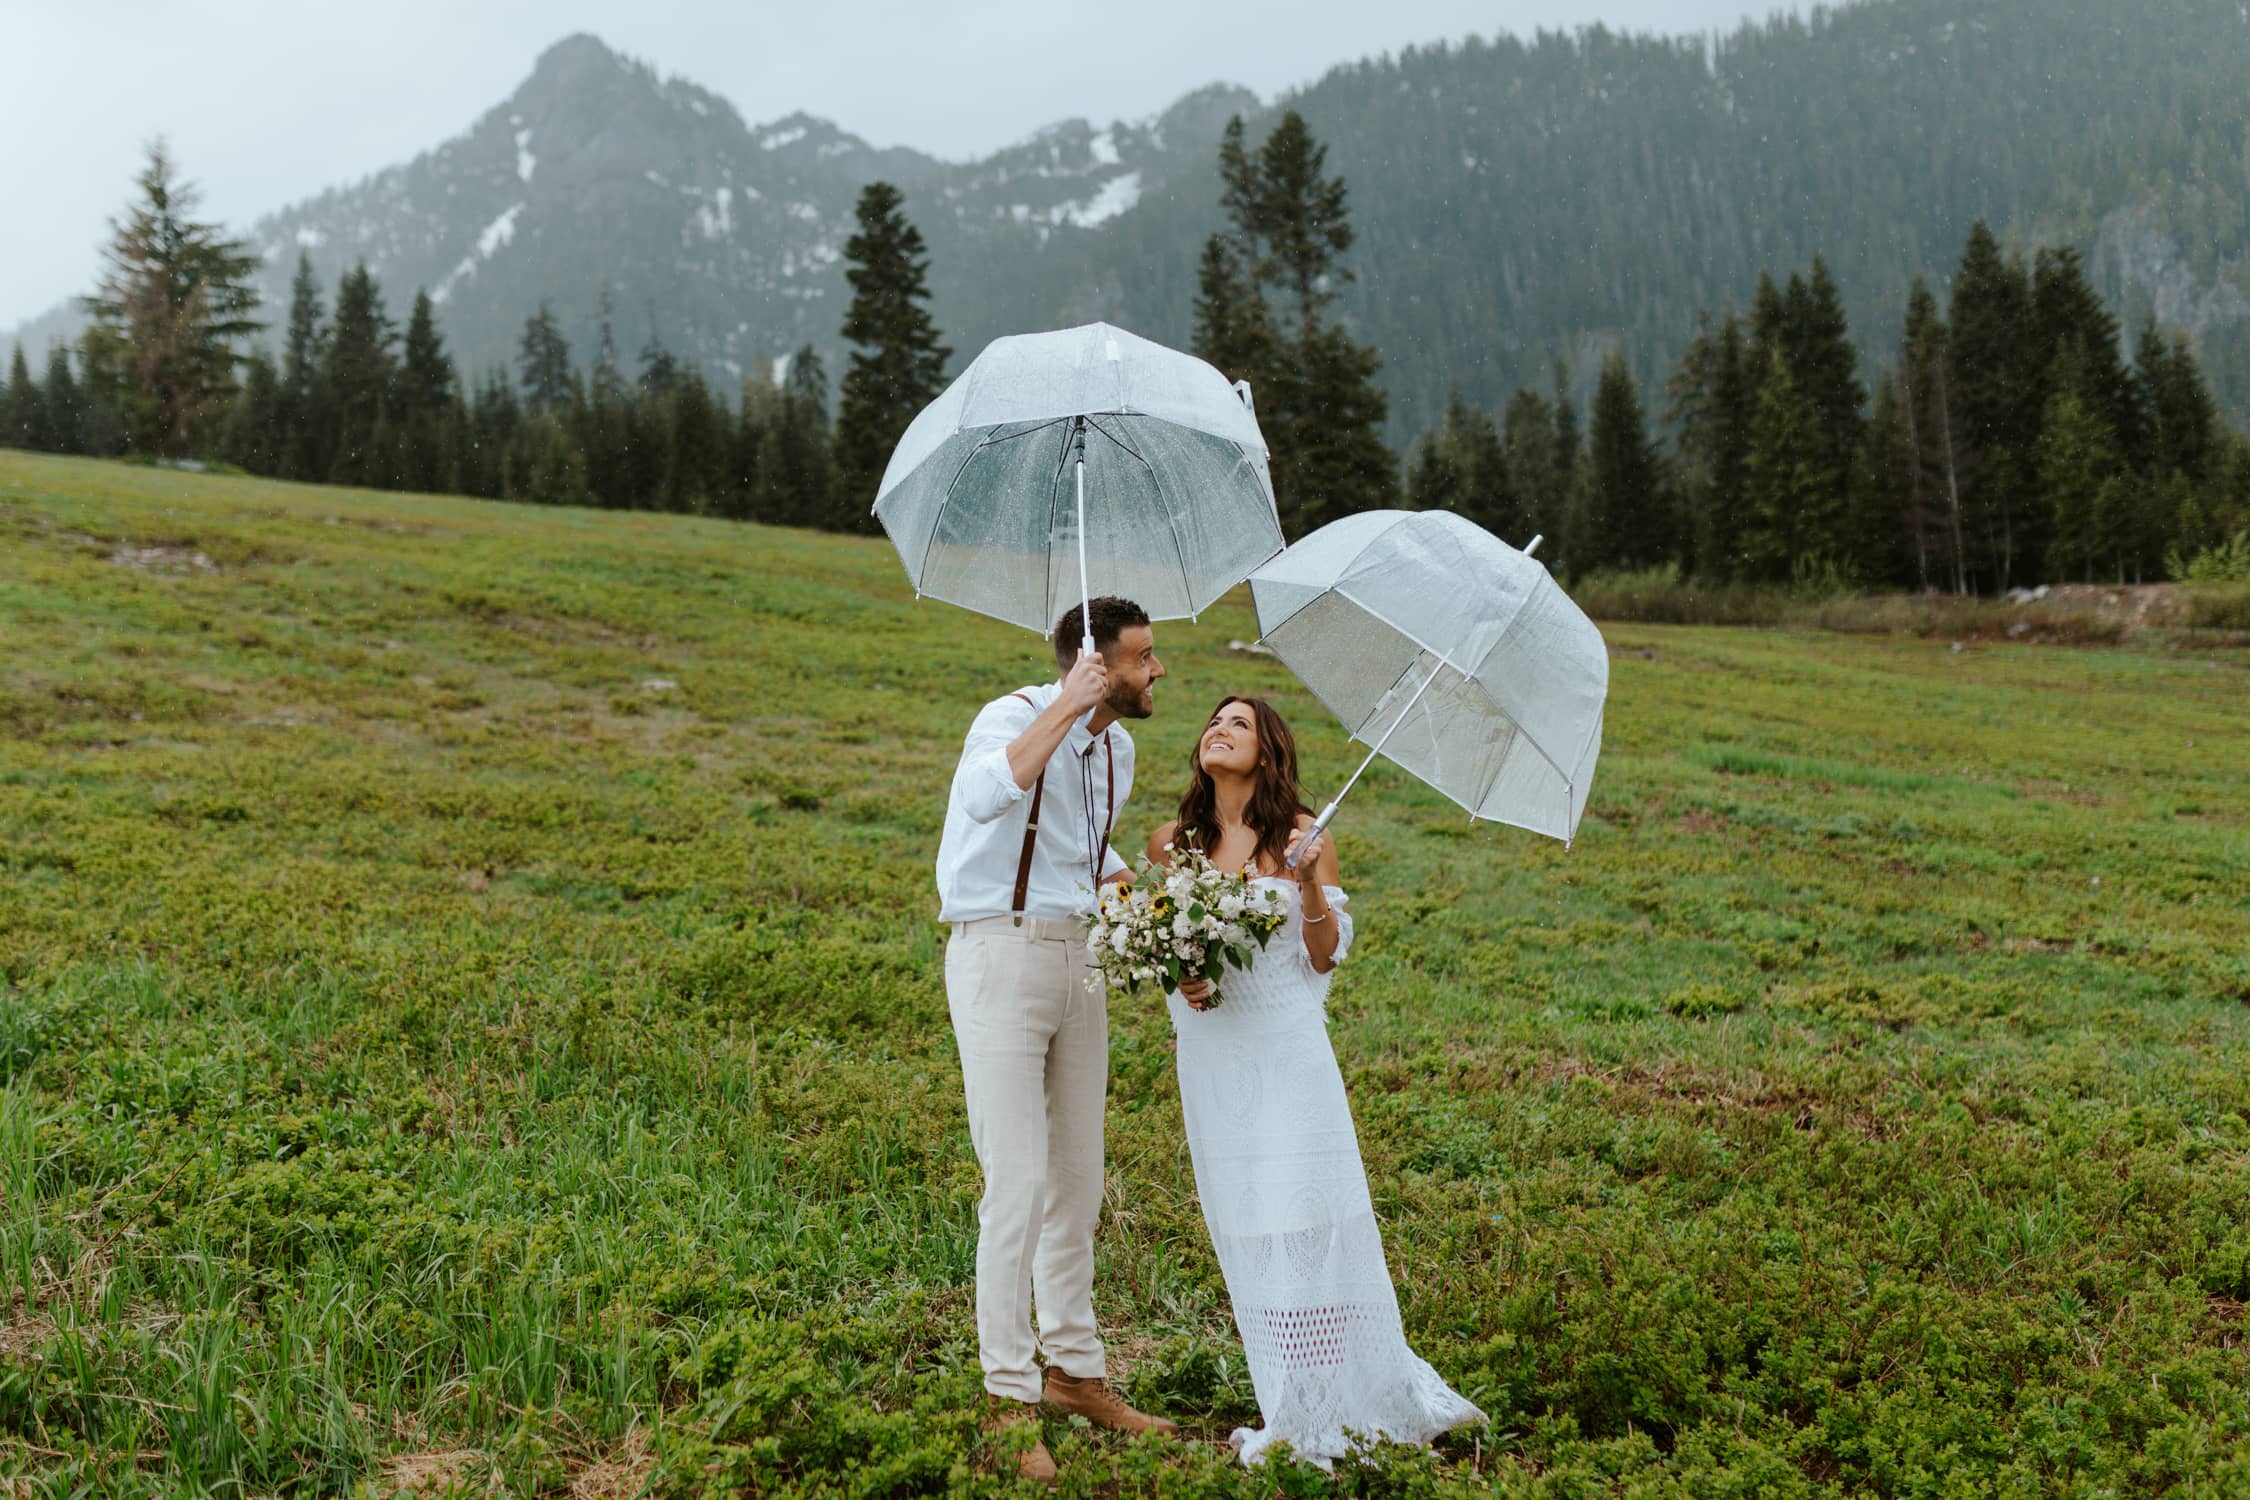 A bride and groom holding umbrellas and looking up at the sky smiling in Washington.